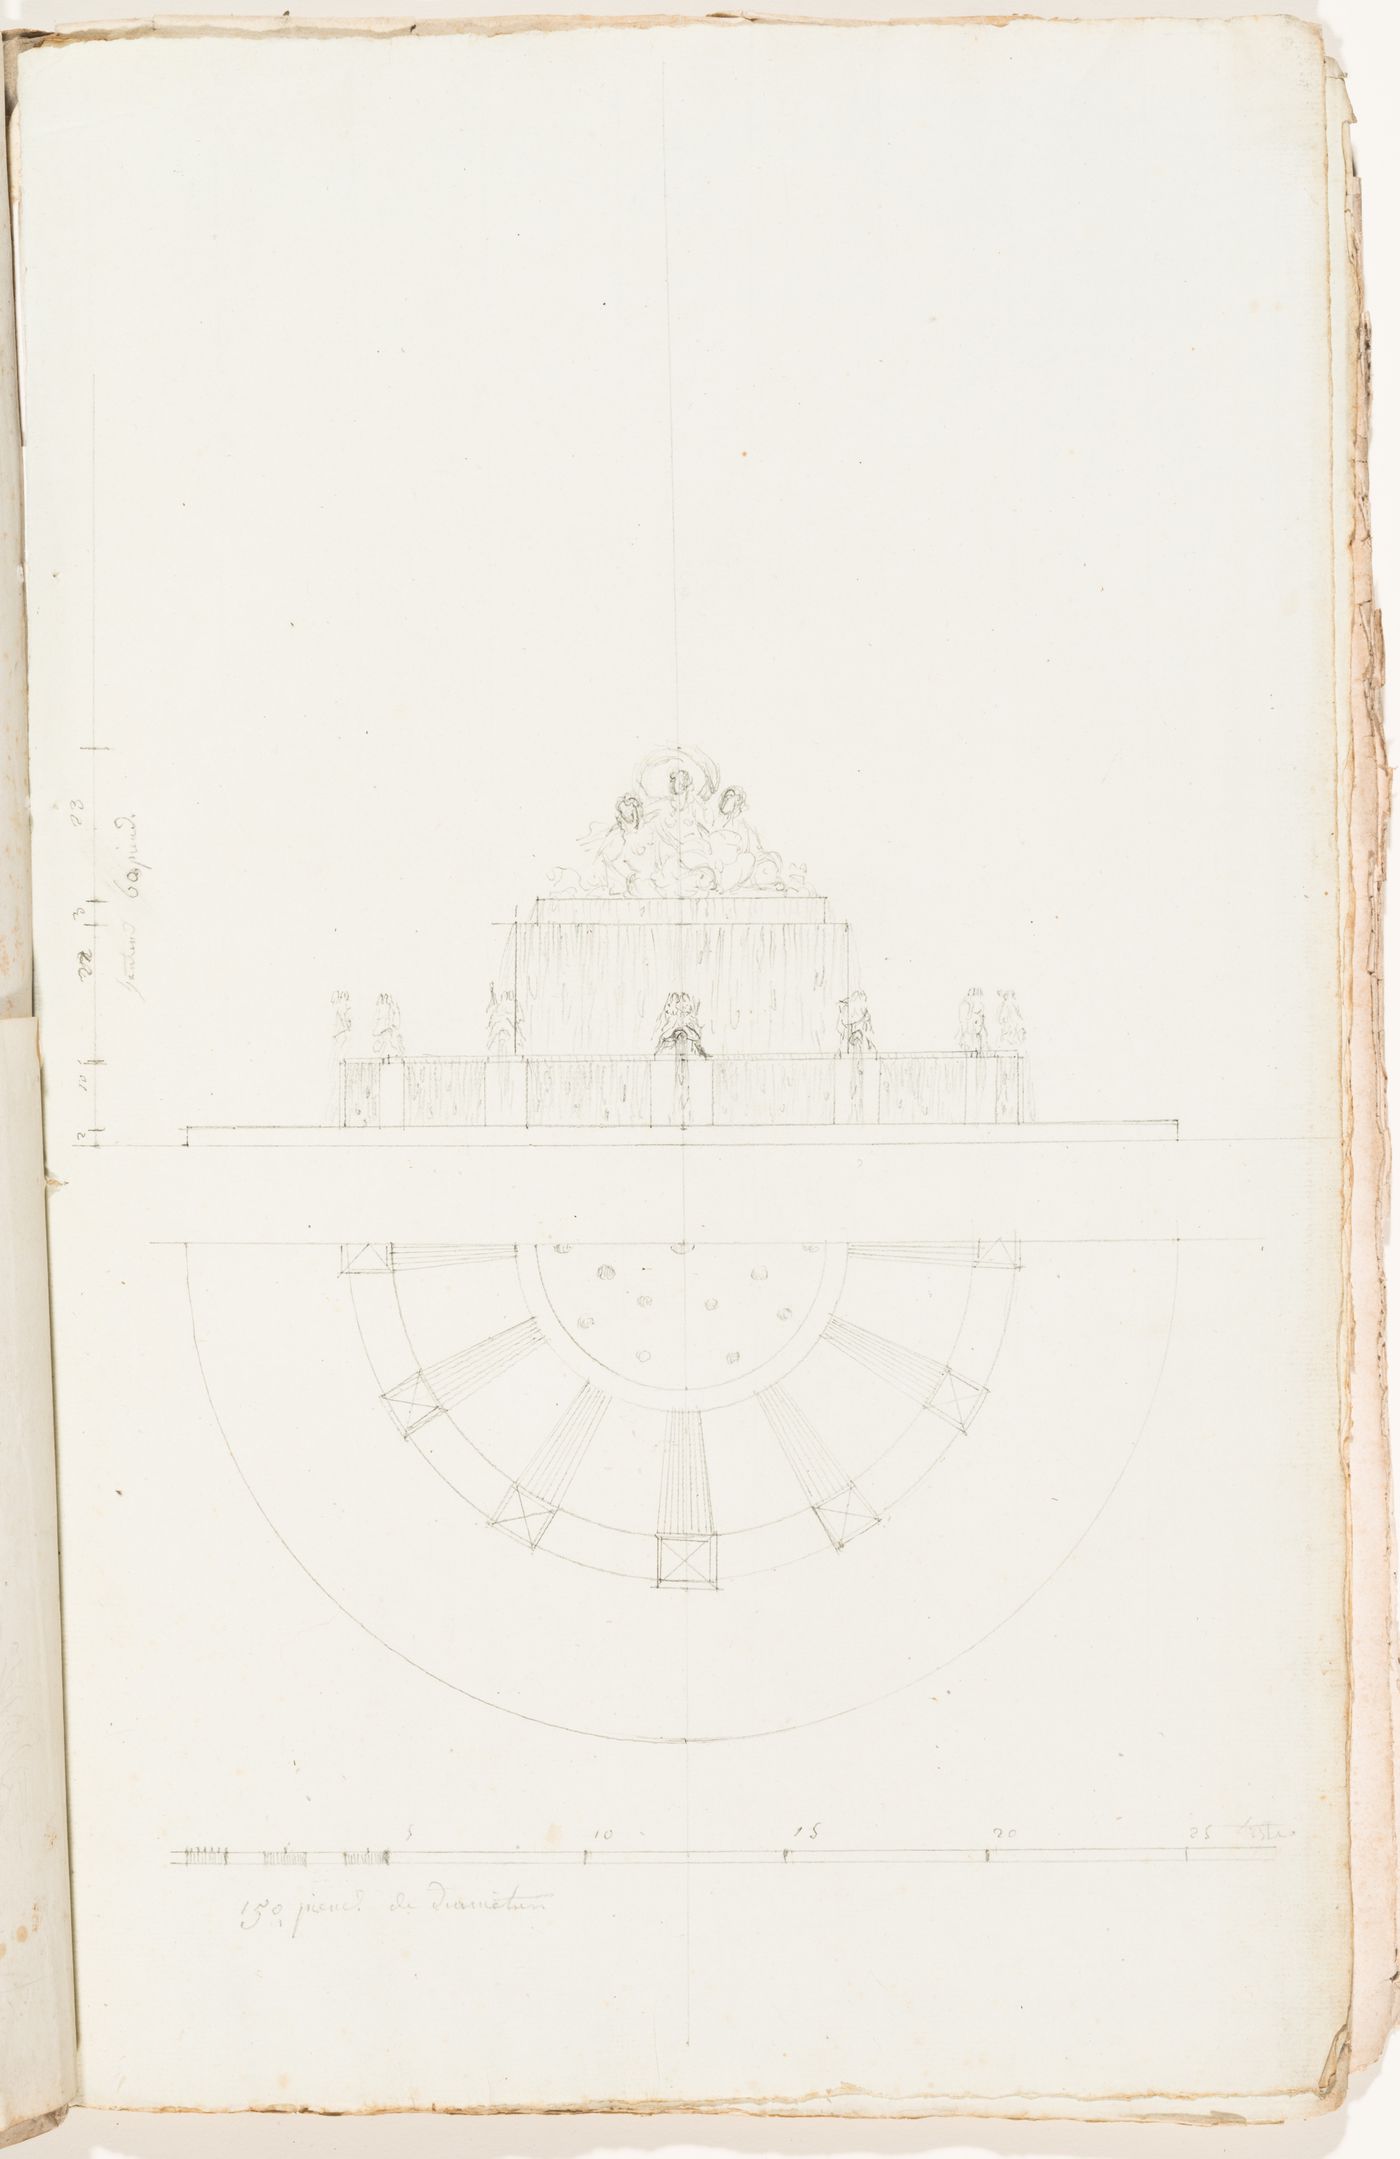 Conceptual sketch elevation and half plan for a two-tiered fountain with a central sculpture